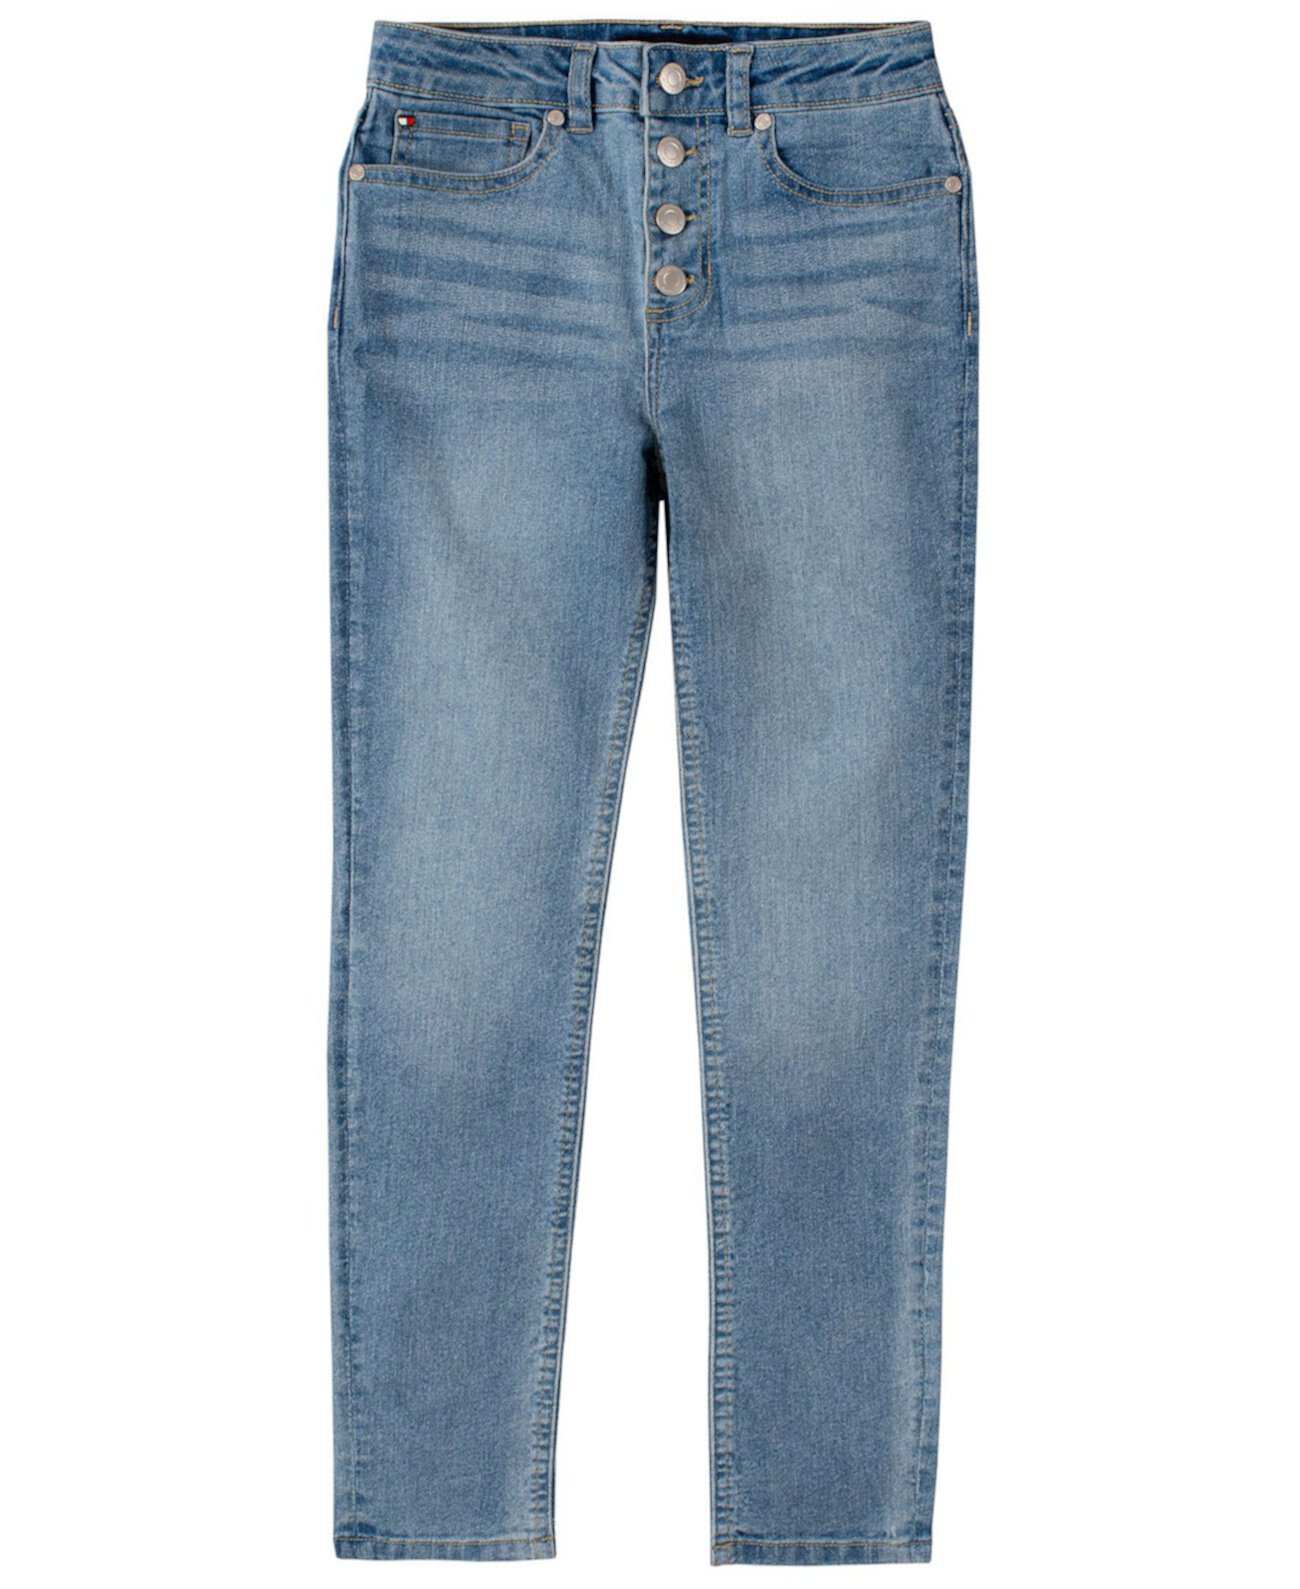 Big Girls High-Waisted Skinny Denim with Button Fly Tommy Hilfiger